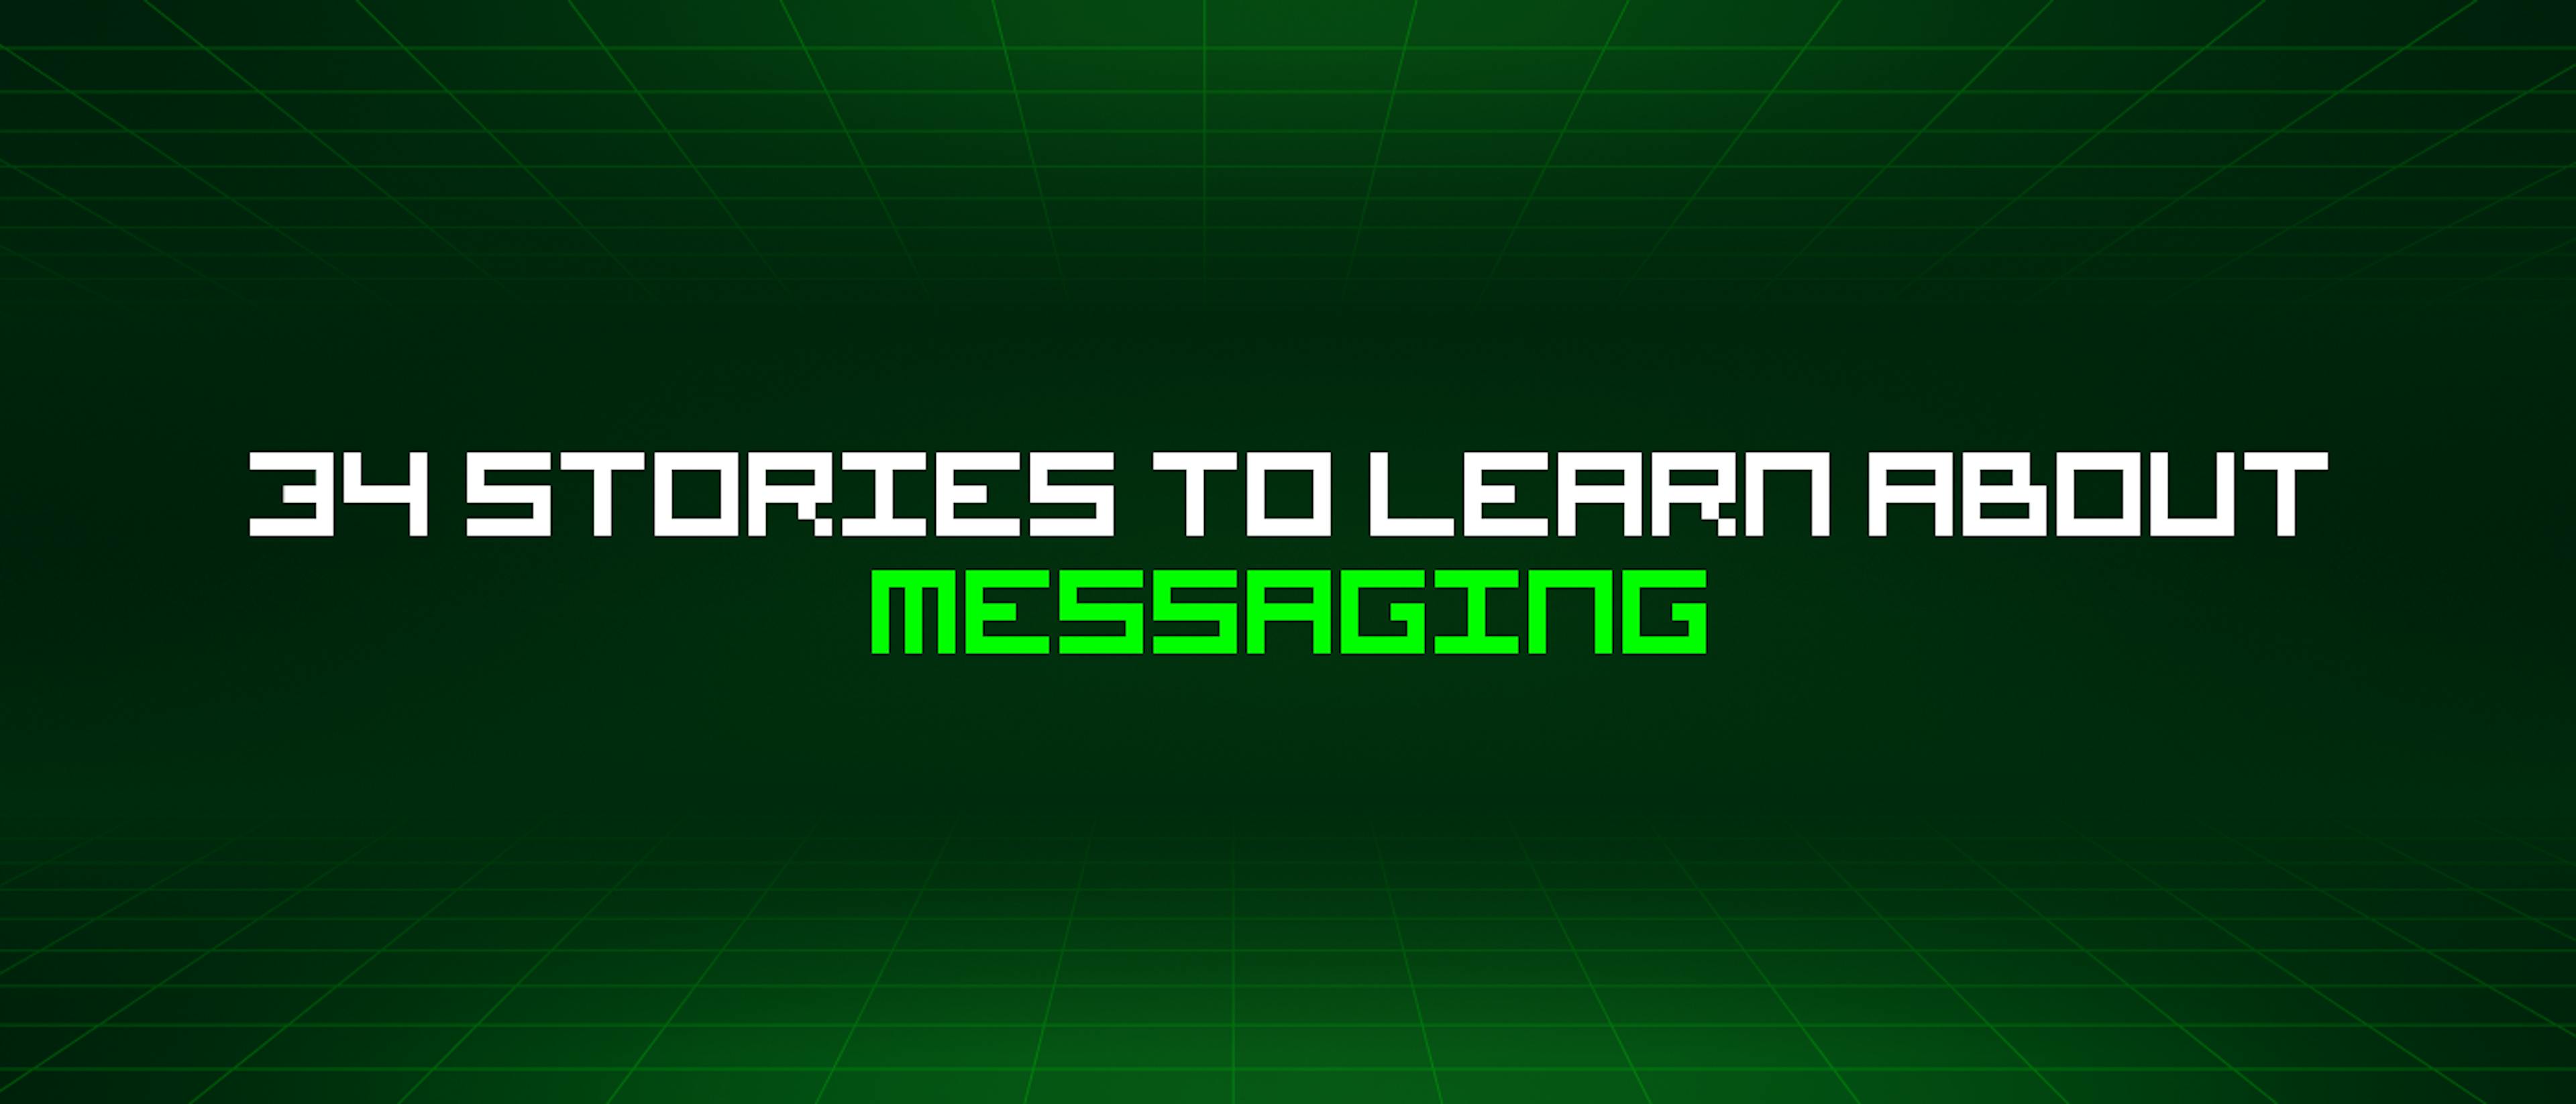 featured image - 34 Stories To Learn About Messaging